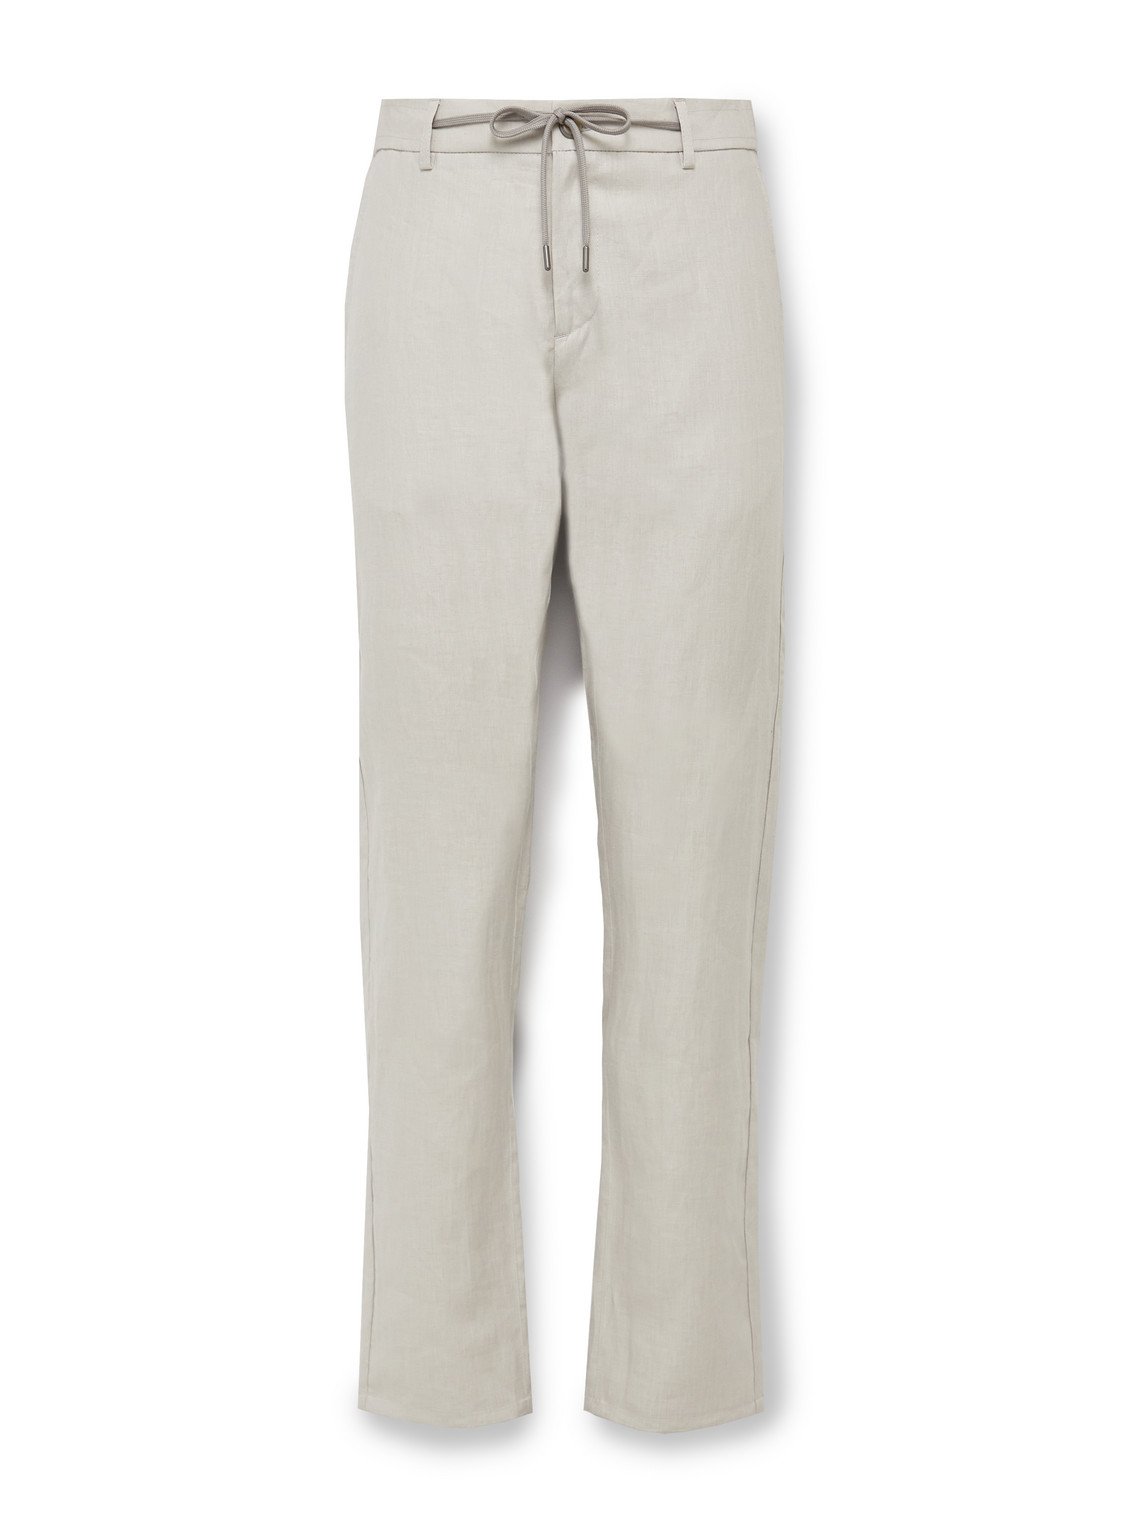 CANALI SLIM-FIT LINEN DRAWSTRING TROUSERS